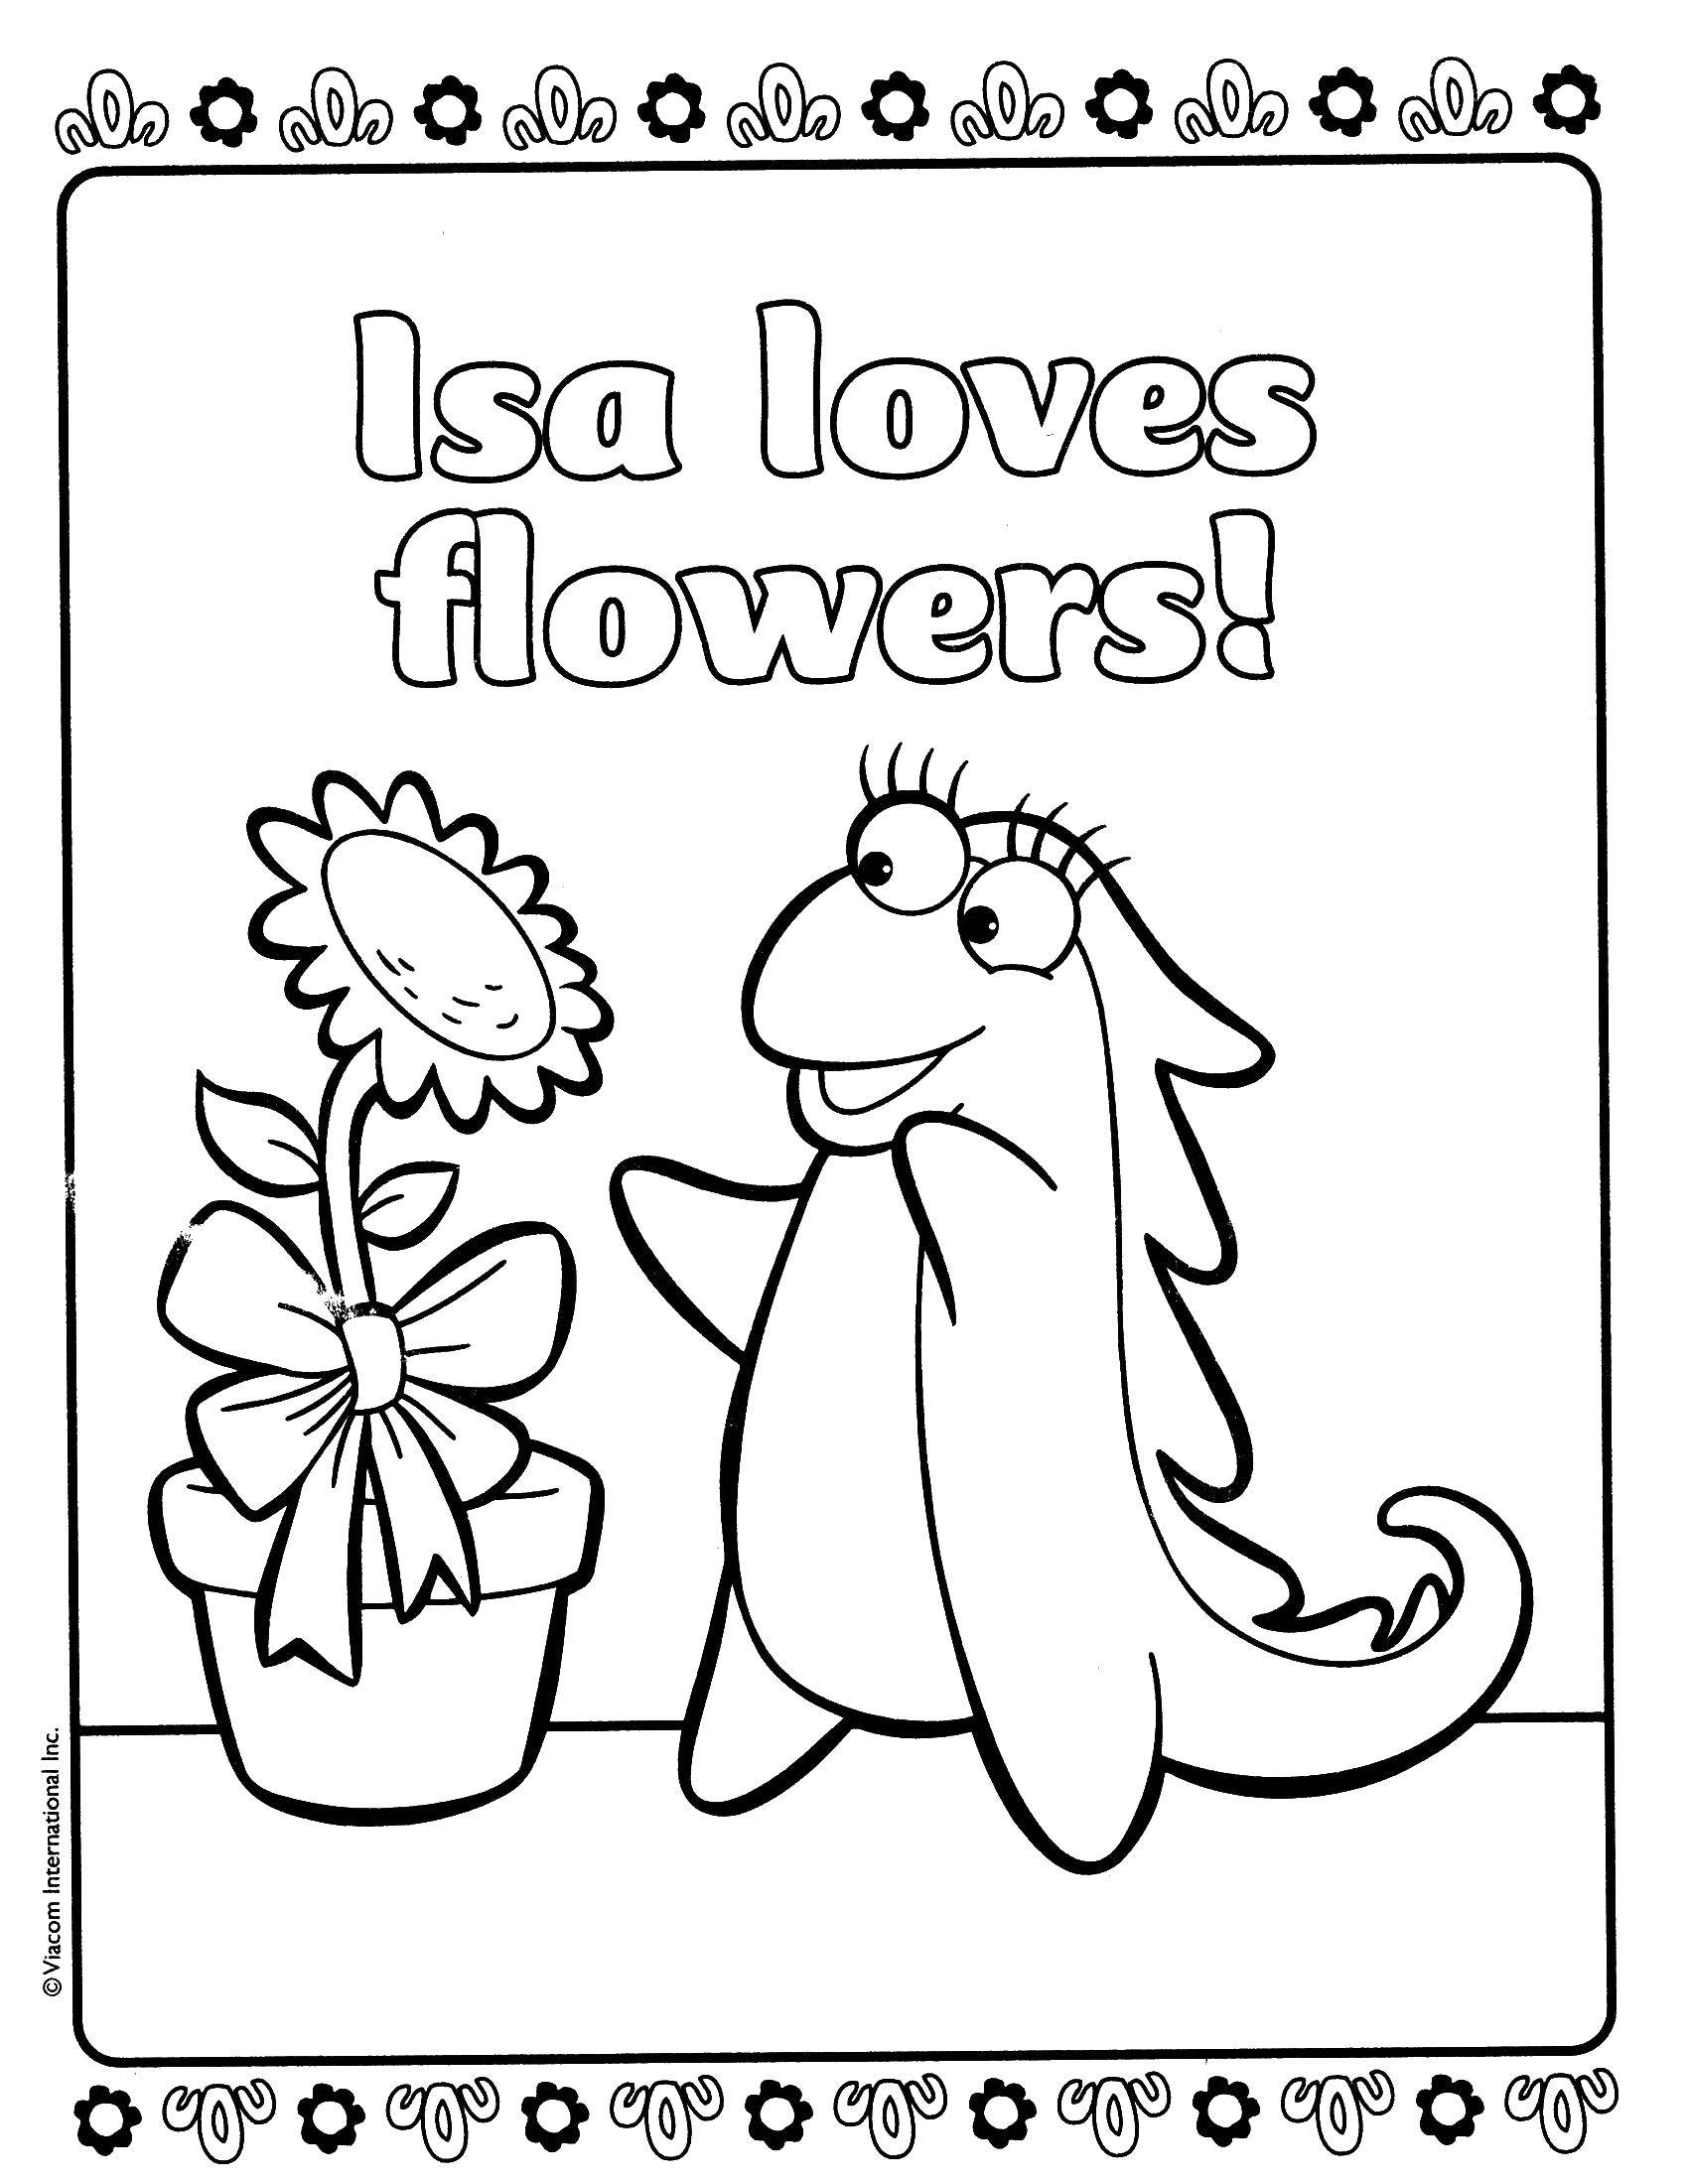 Coloring ISA loves flowers!. Category Dasha traveler. Tags:  Cartoon character.